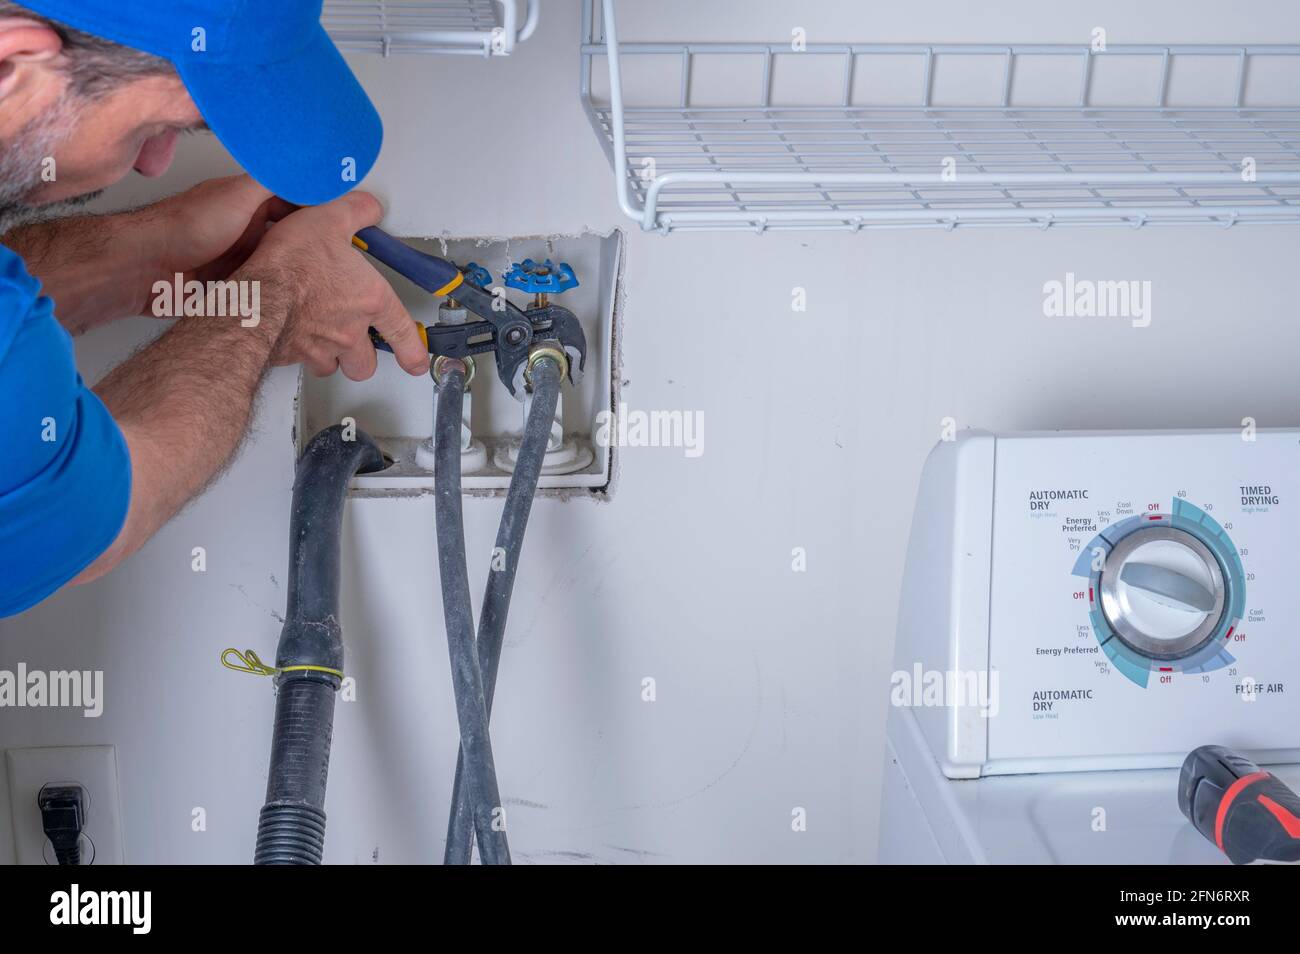 Plumber in a residential home hooking up water supply lines for a washing machine, appliance repair service Stock Photo